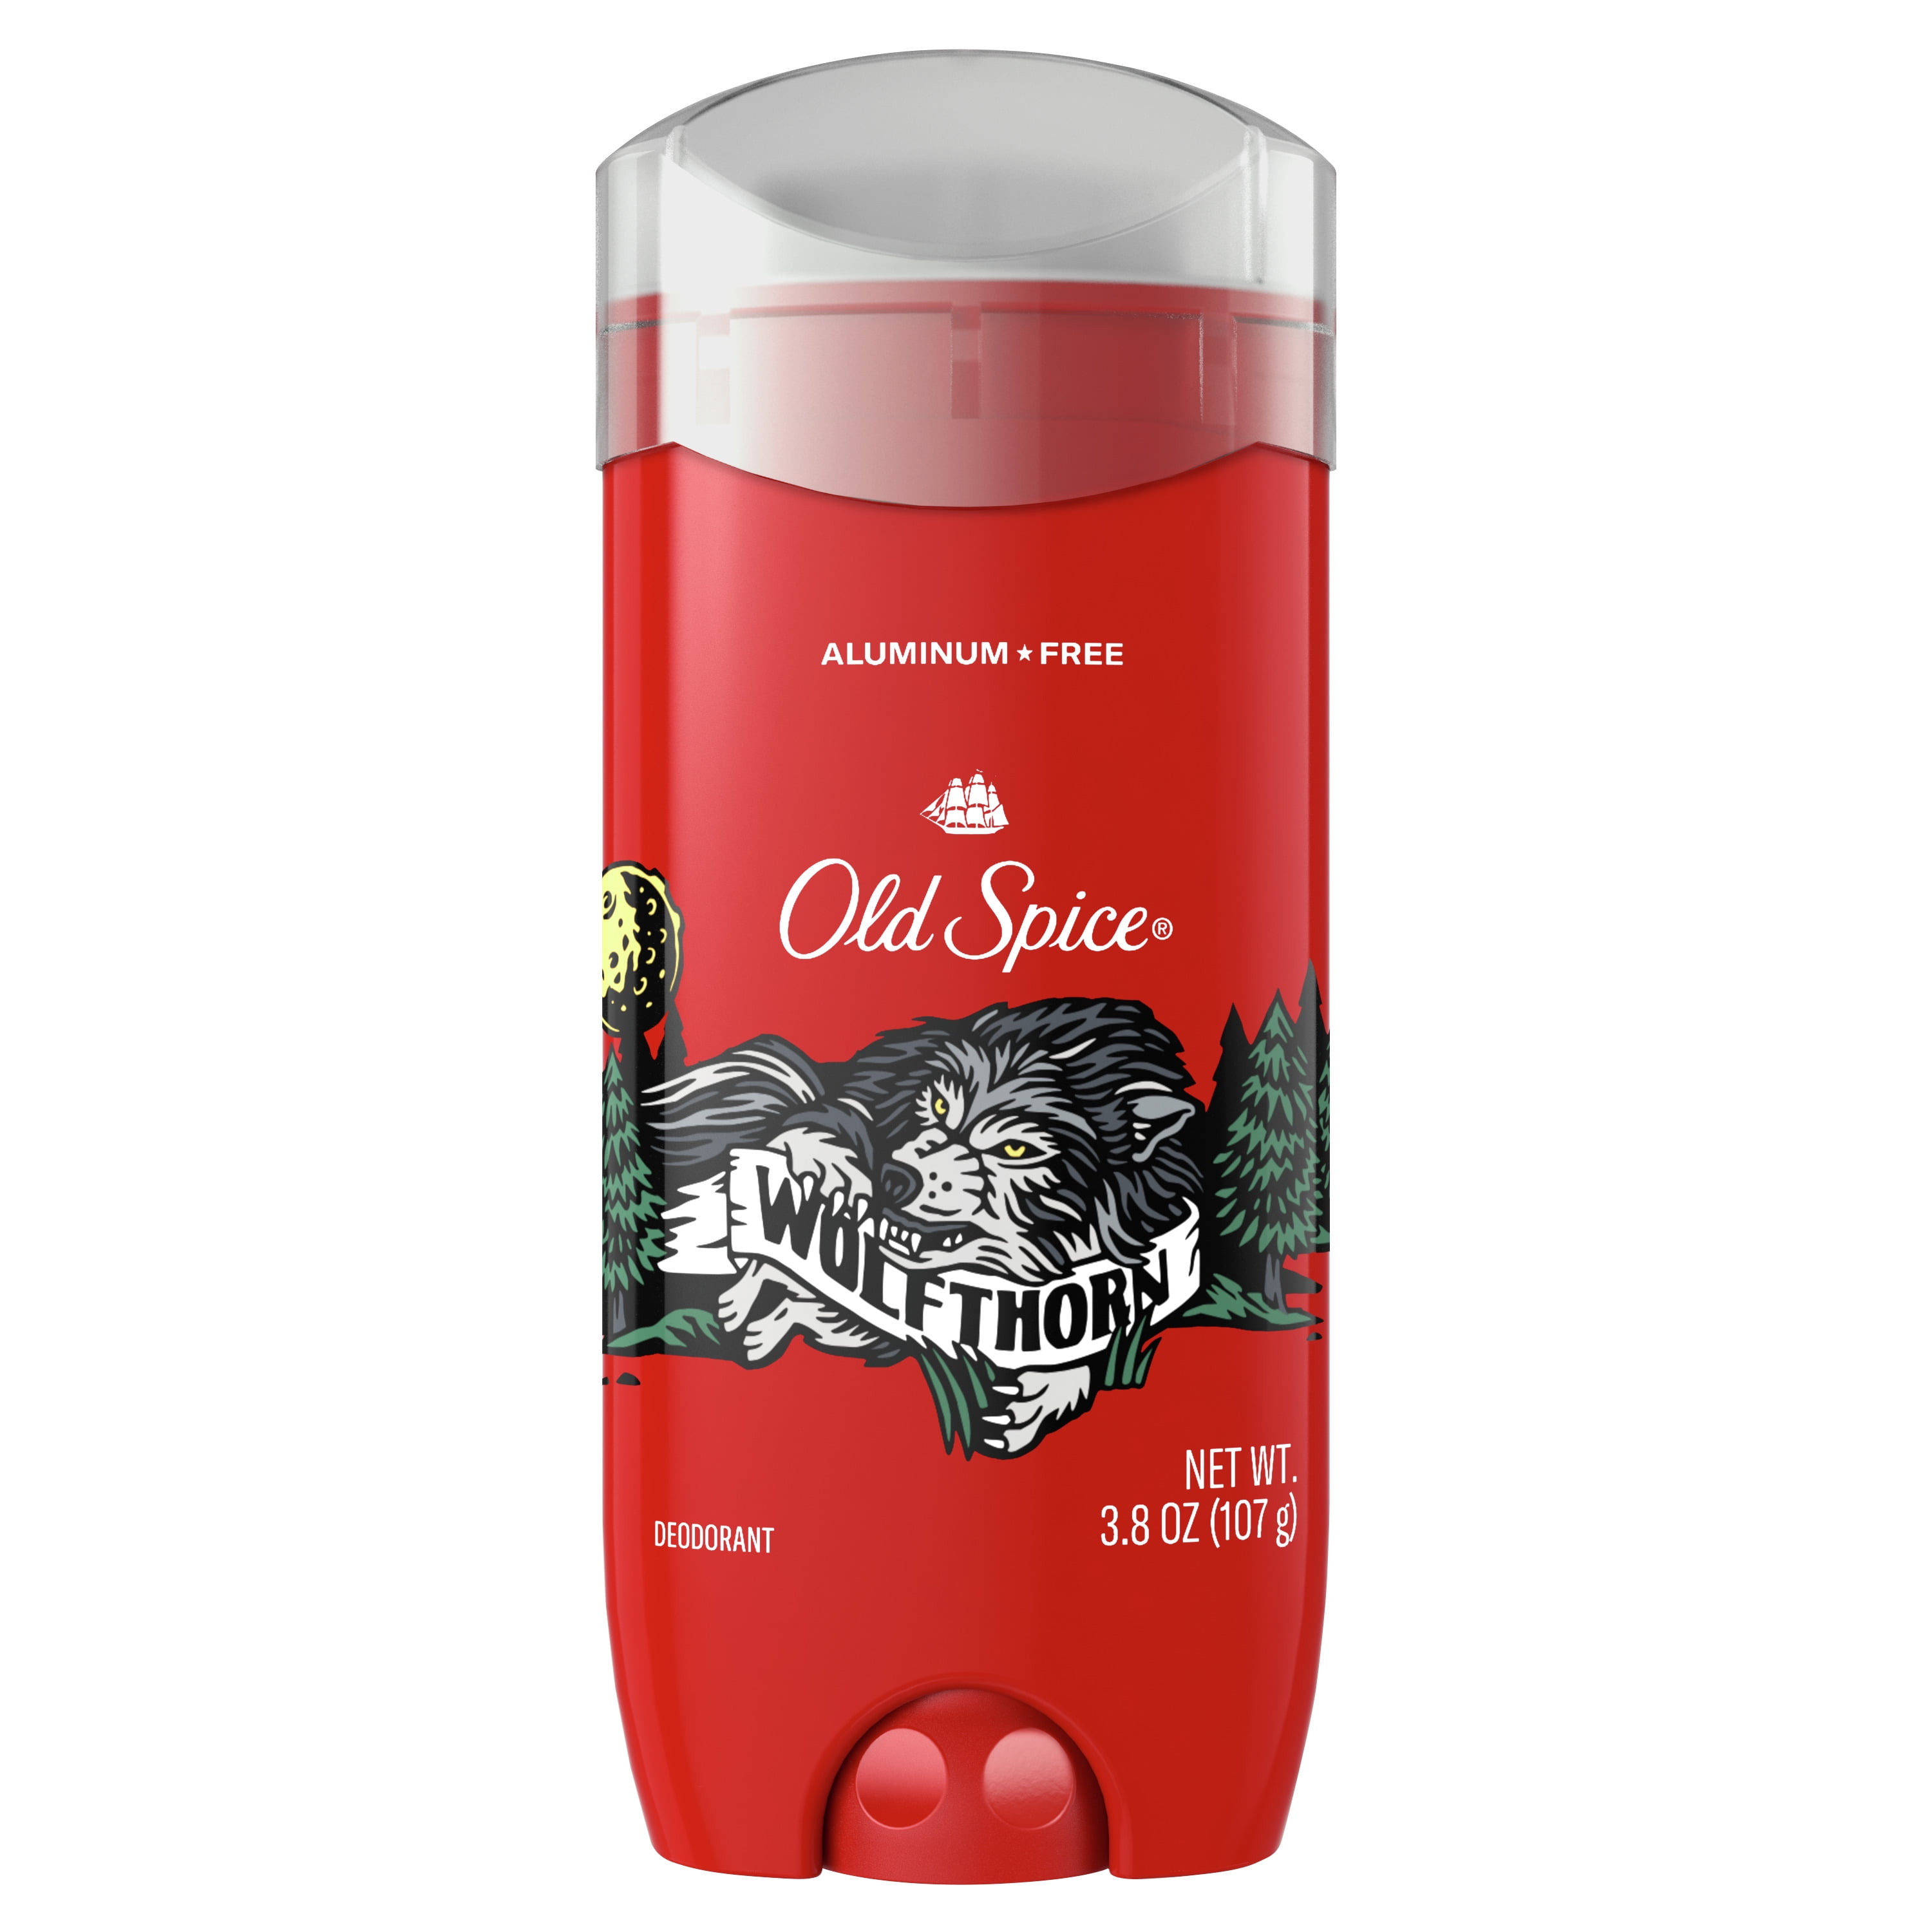 Old Spice Aluminum Free Deodorant for Men, Wolfthorn, 48 Hr. Protection, 3.8 oz